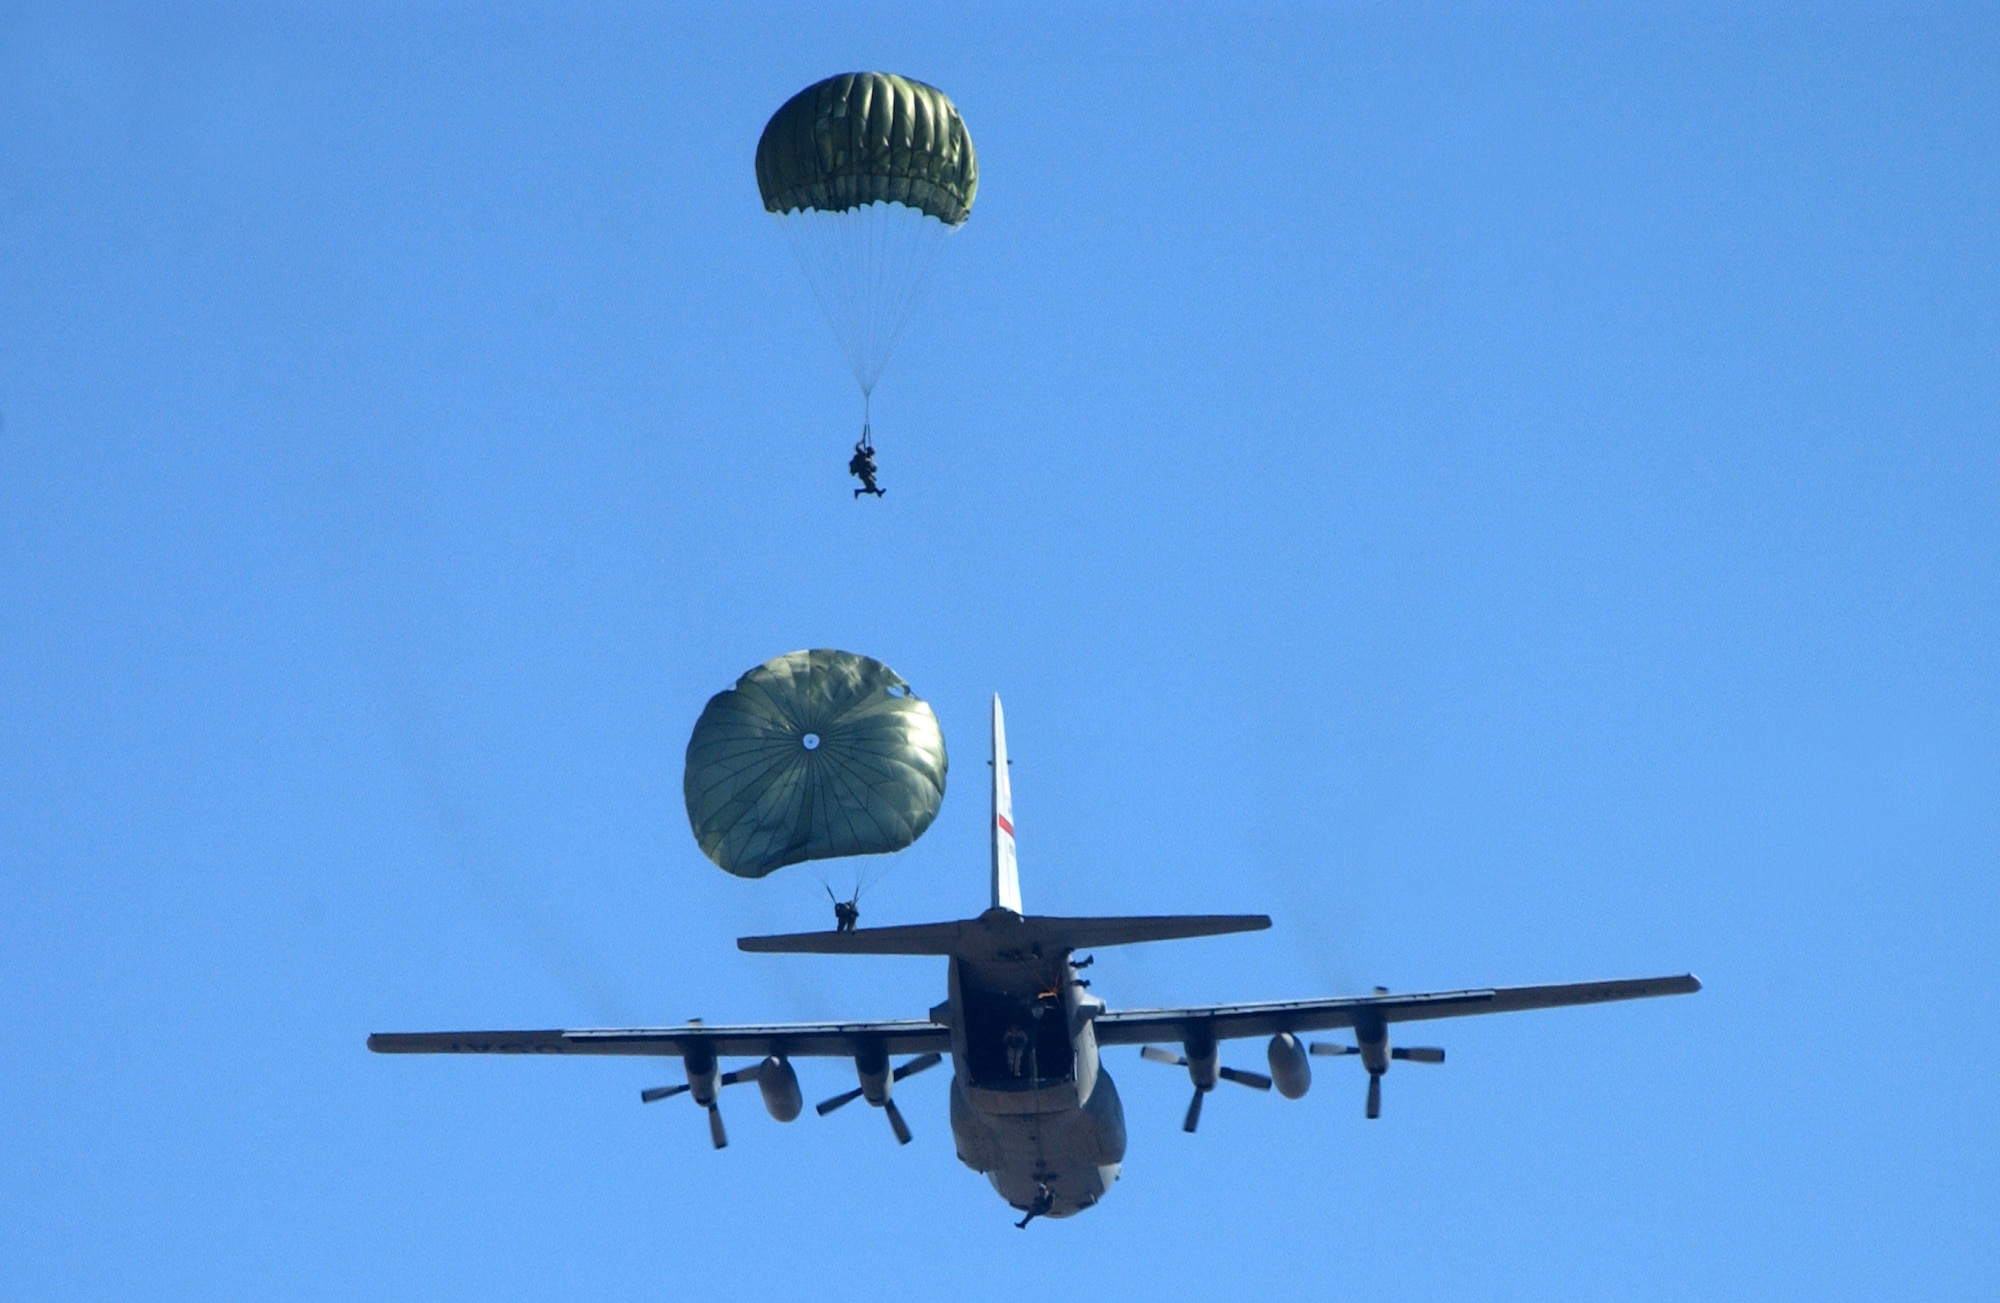 A C-130 Hercules, similar to this one, participated in high altitude-low opening jump exercise Aug. 2 over an airfield near Banja Luka, Bosnia.  U.S. and Bosnian jumpers participated in the HALO exercise.  The aircrew and plane were from the 37th Airlift Squadron at Ramstein Air Base, Germany.  (U.S. Air Force photo/Staff Sgt. Kenny Kennemer)                      